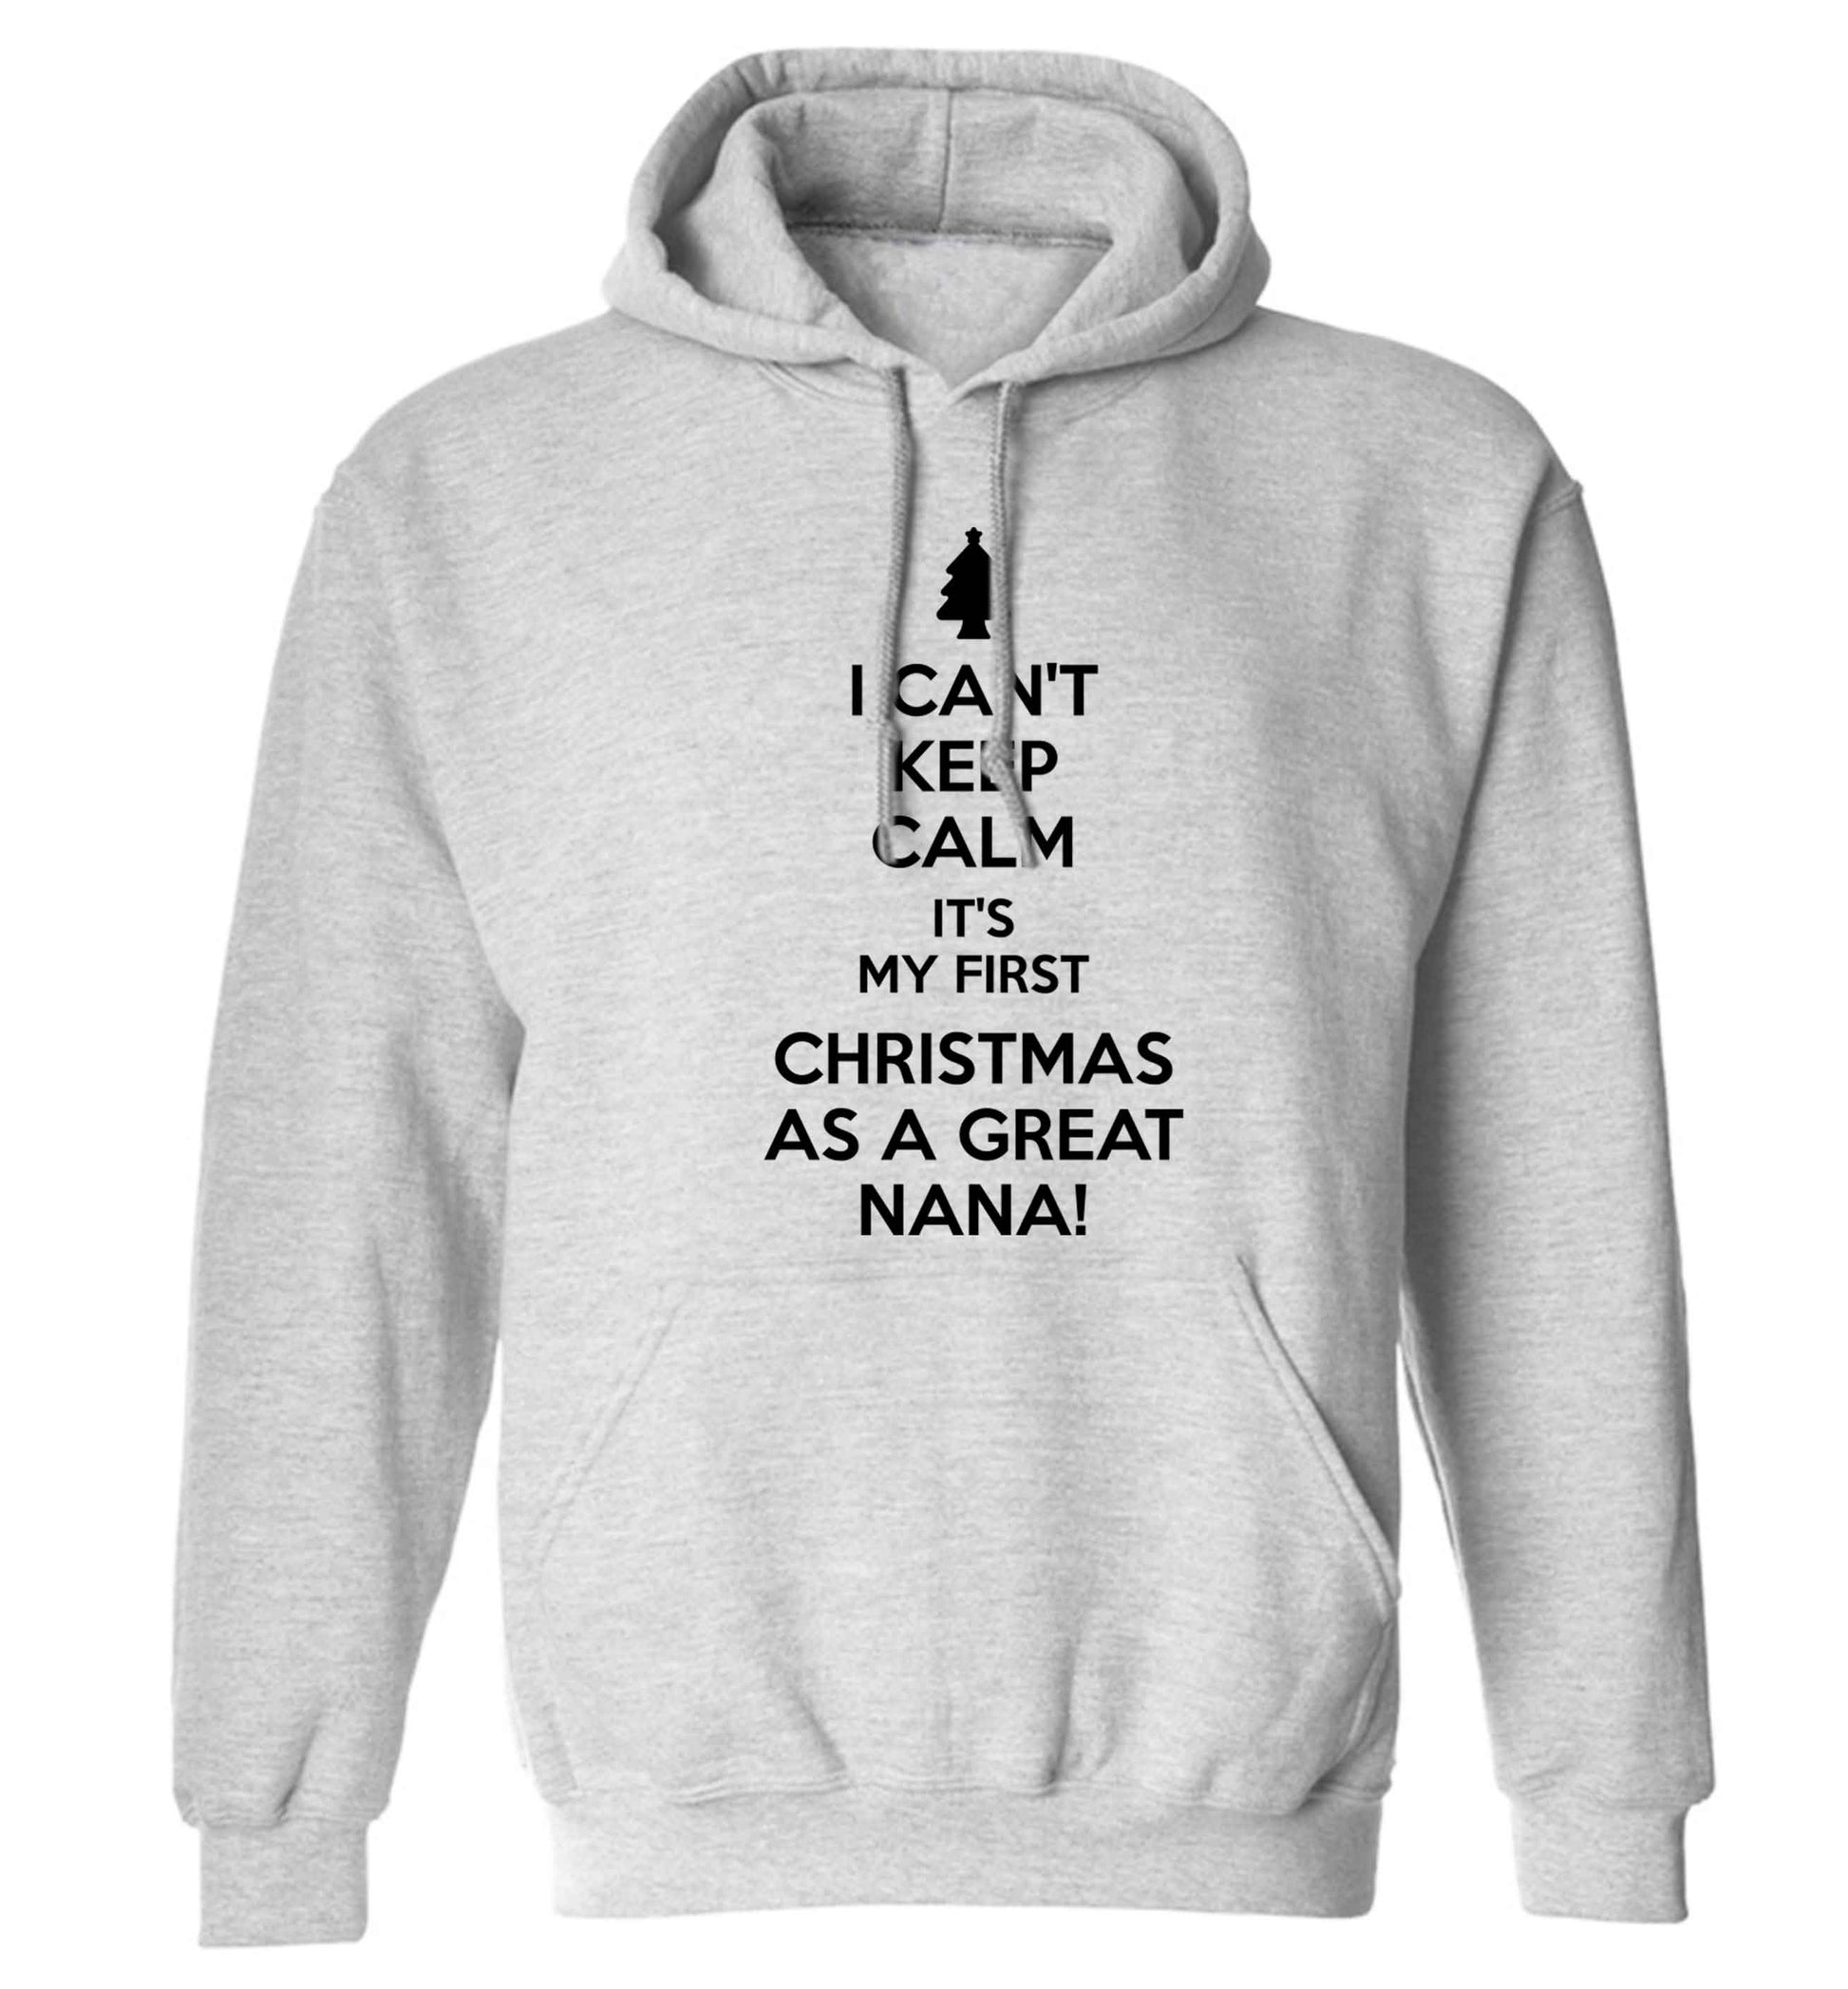 I can't keep calm it's my first Christmas as a great nana! adults unisex grey hoodie 2XL